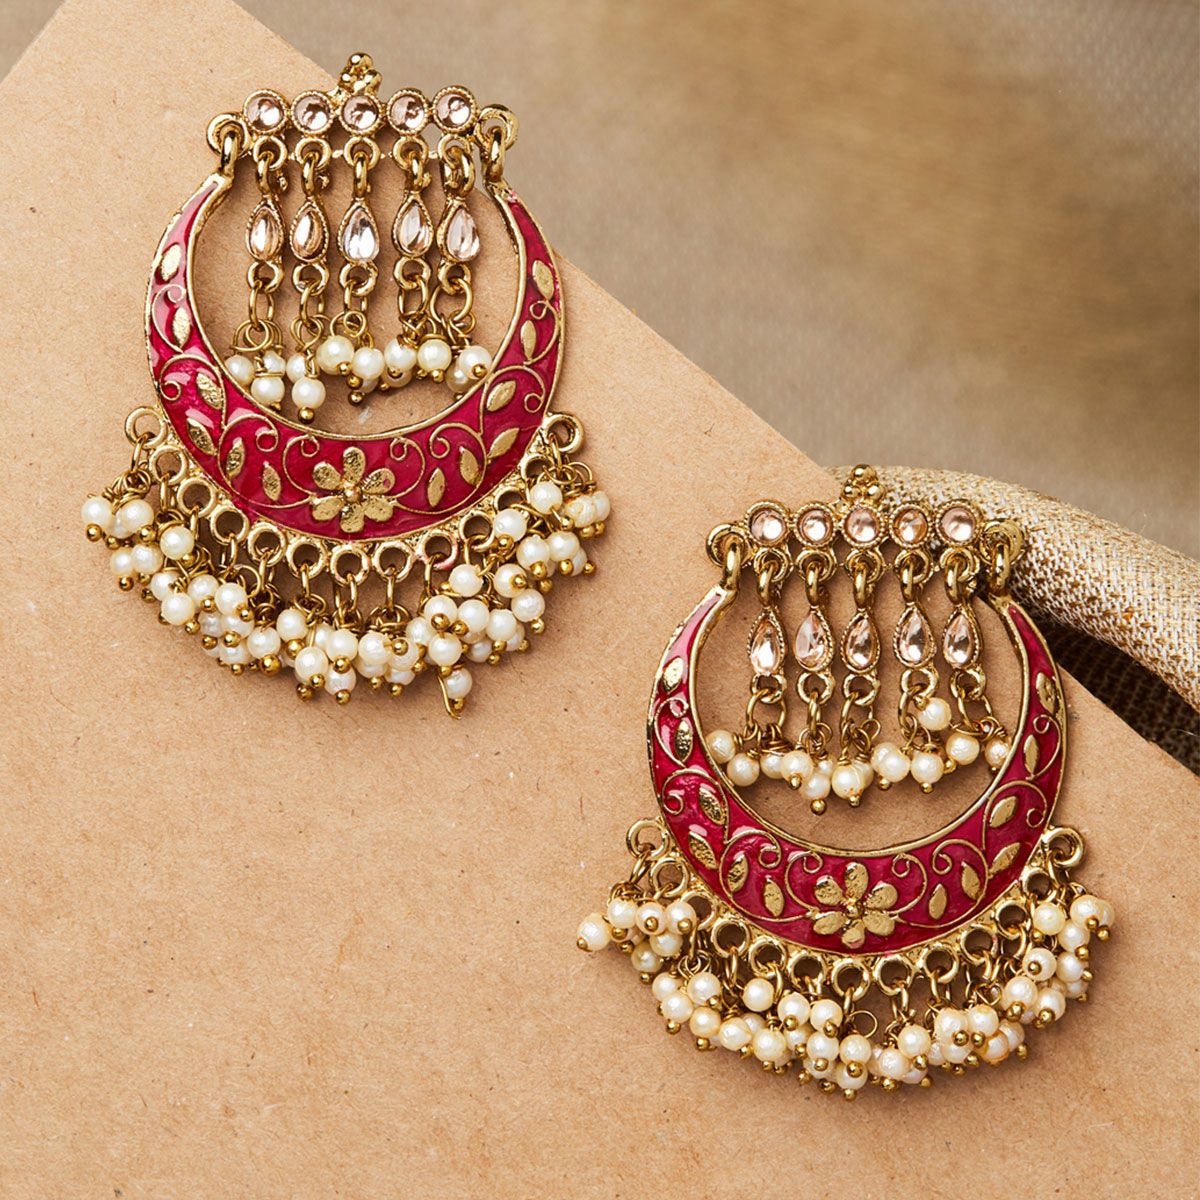 Ethnic ruby pink Antique silver tone earrings at 1550  Azilaa